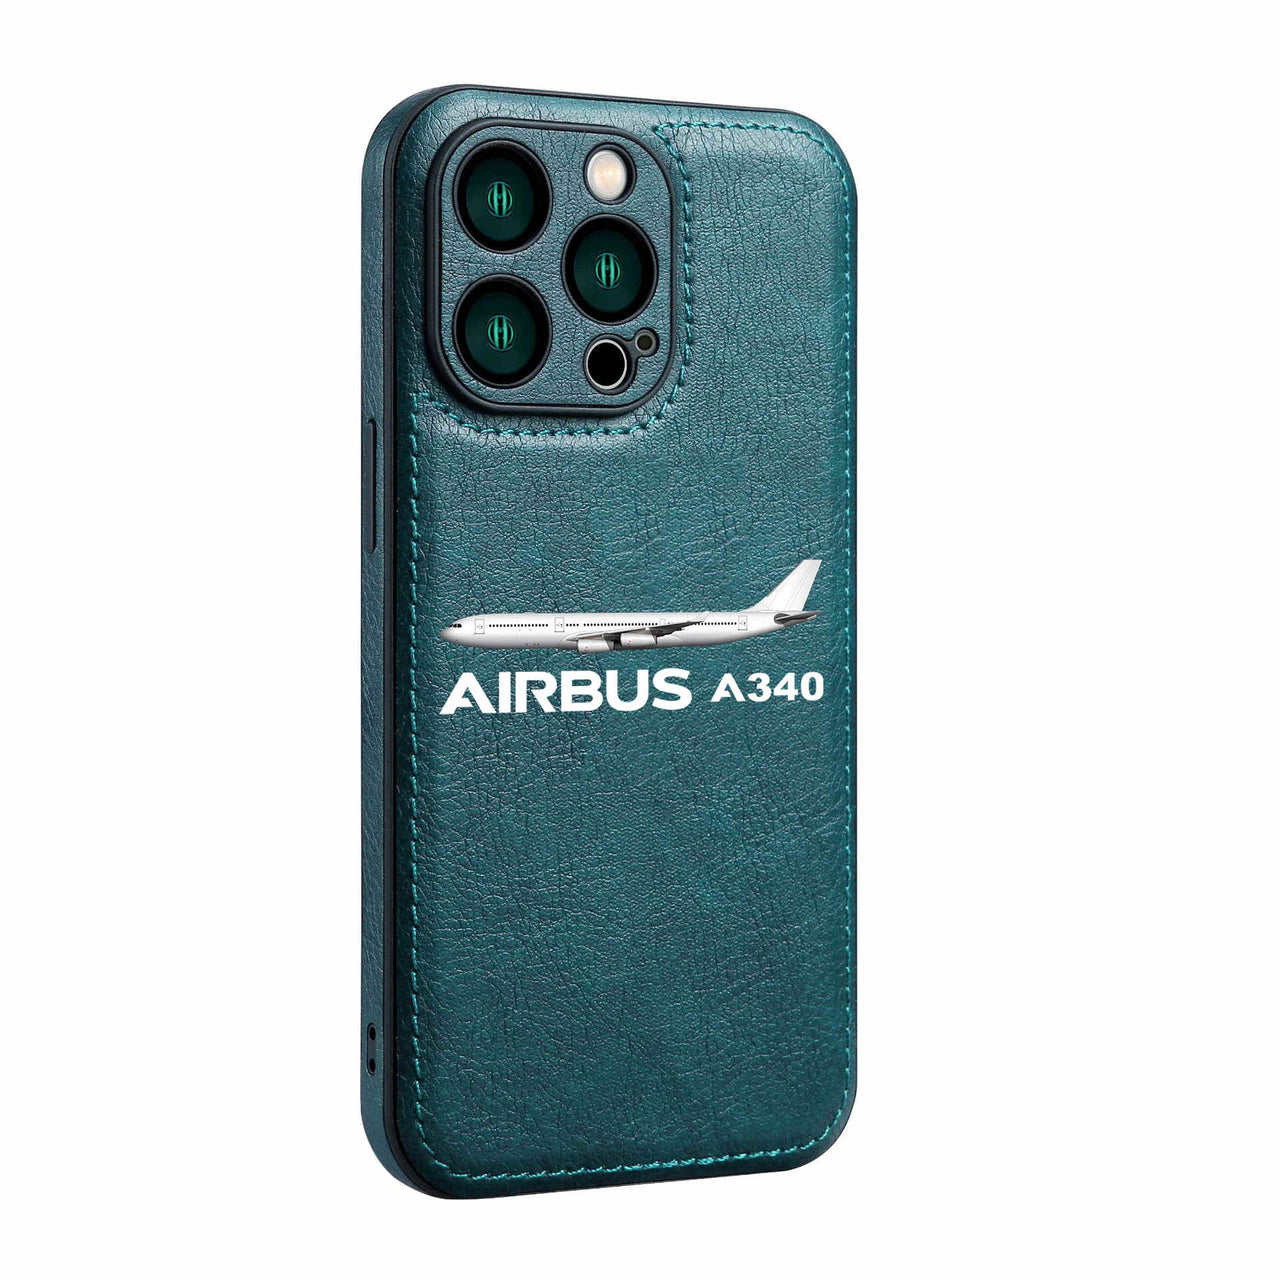 The Airbus A340 Designed Leather iPhone Cases